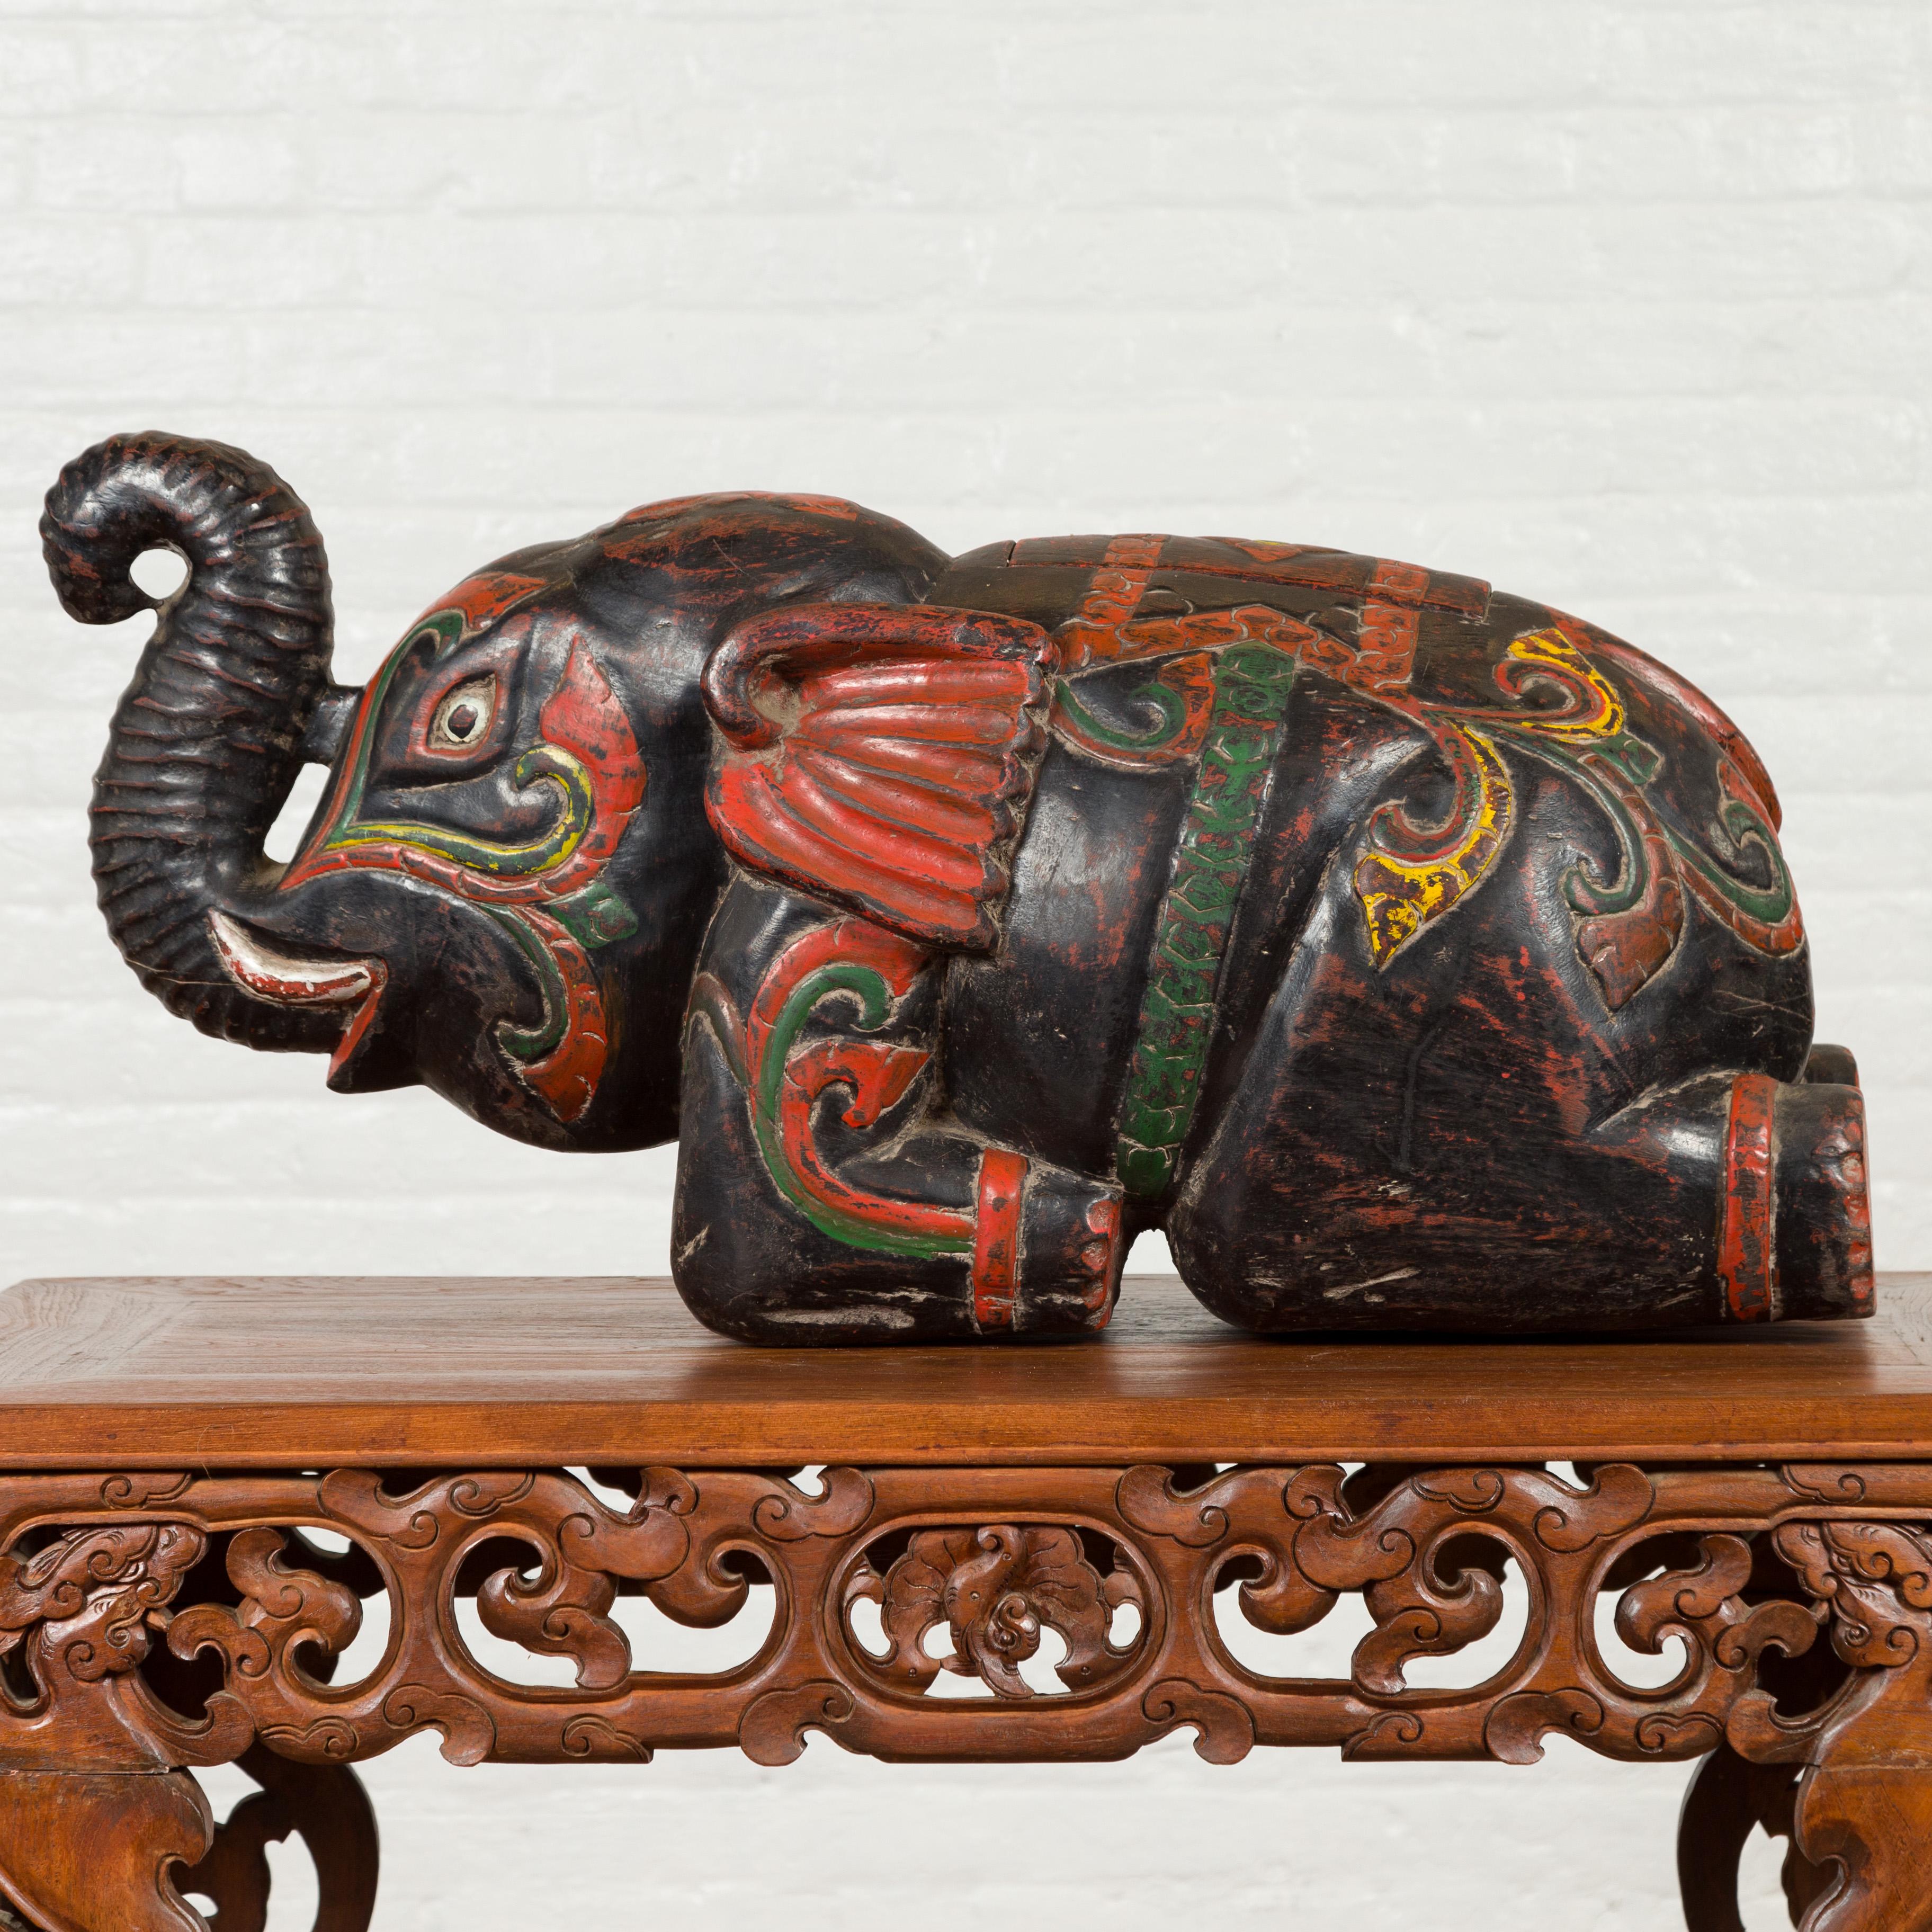 A handmade vintage Thai wooden elephant sculpture with incised decor and multi-color accents. We are immediately drawn to this carved Thai elephant, depicted in a reclining posture, his trunk lifted up. A multi-color accentuation, made of red, green